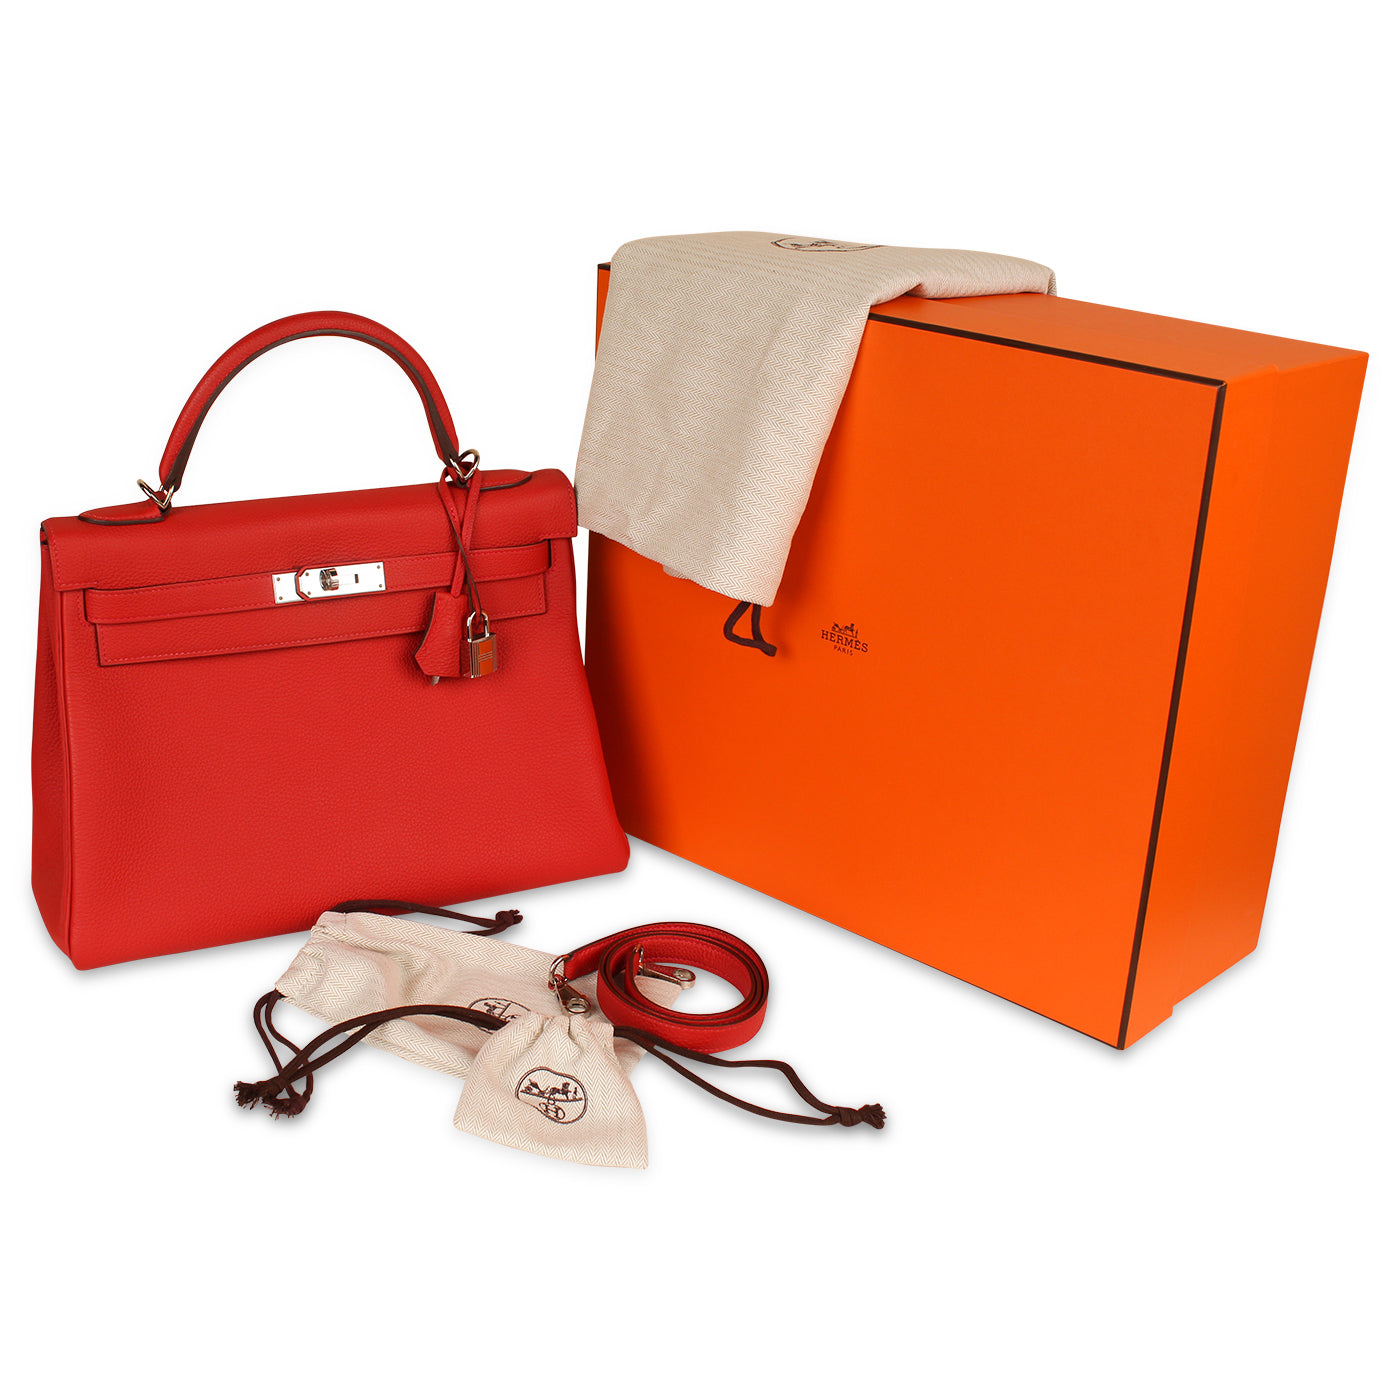 Hermes Kelly 32 Bag Ghillies s5 Rouge Tomate Togo PHW